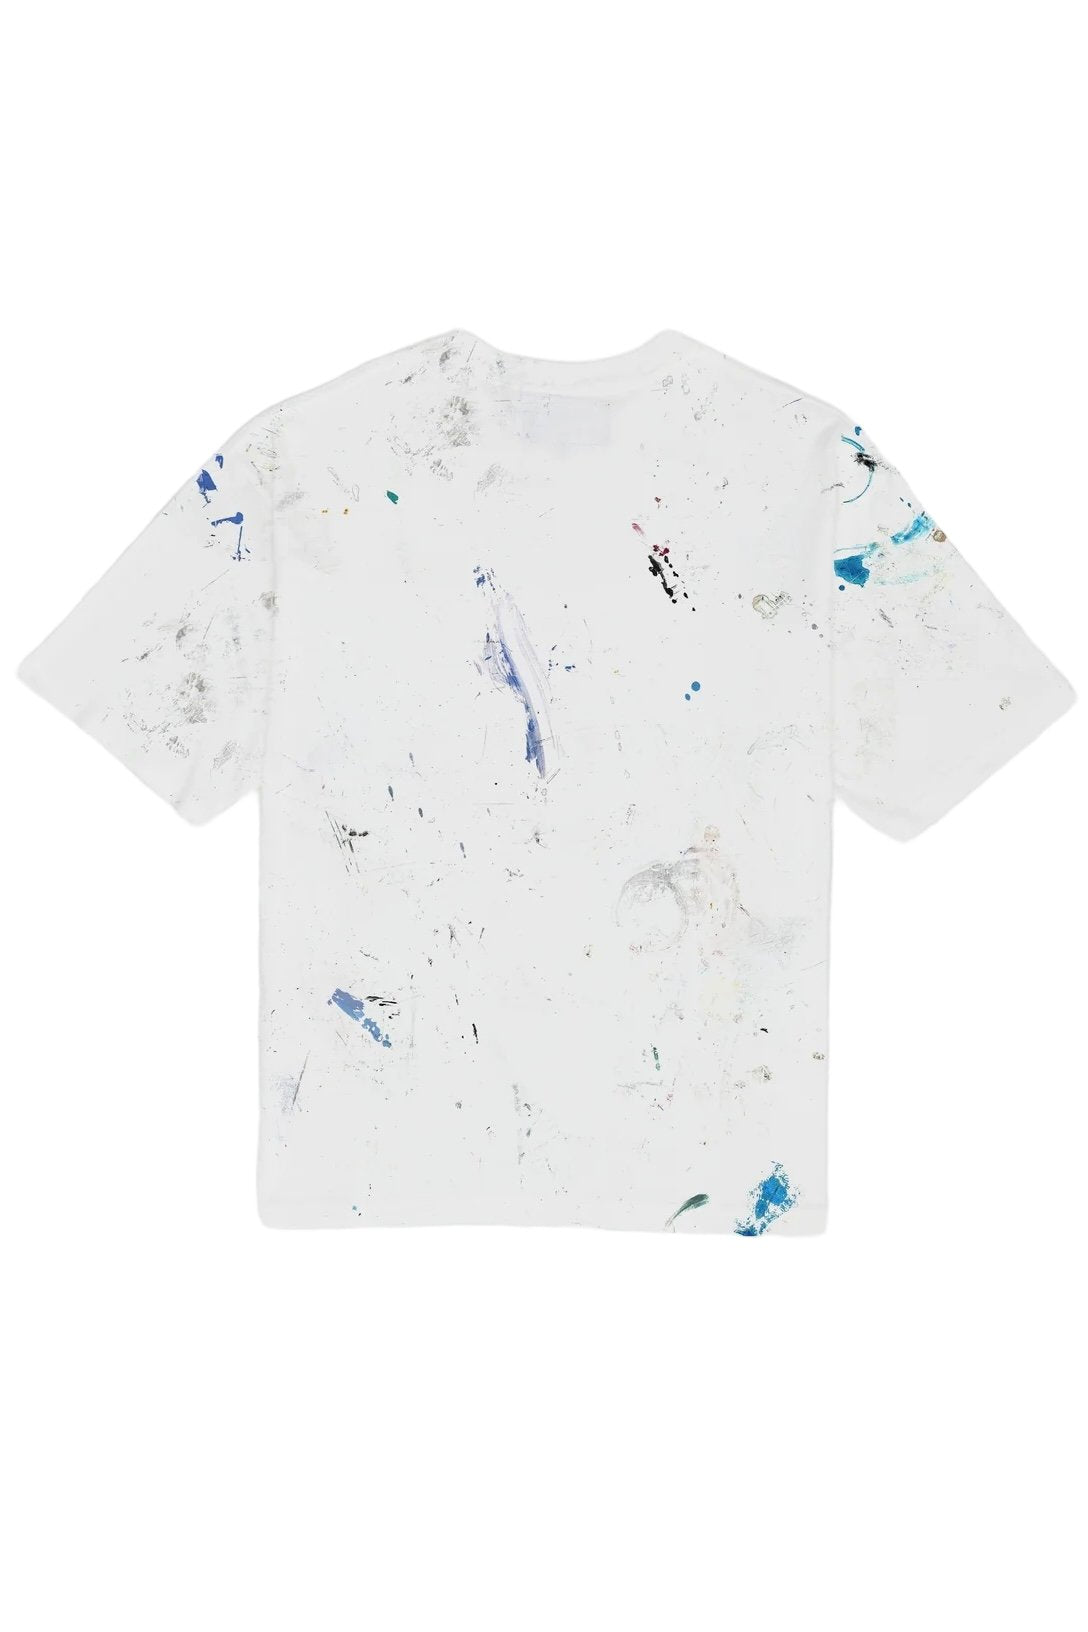 A white, regular fit DOM REBEL shirt with scattered paint splatters in various colors, crafted from 200GSM ringspun jersey cotton. The product is known as the DOMREBEL RAG T-SHIRT IVORY.